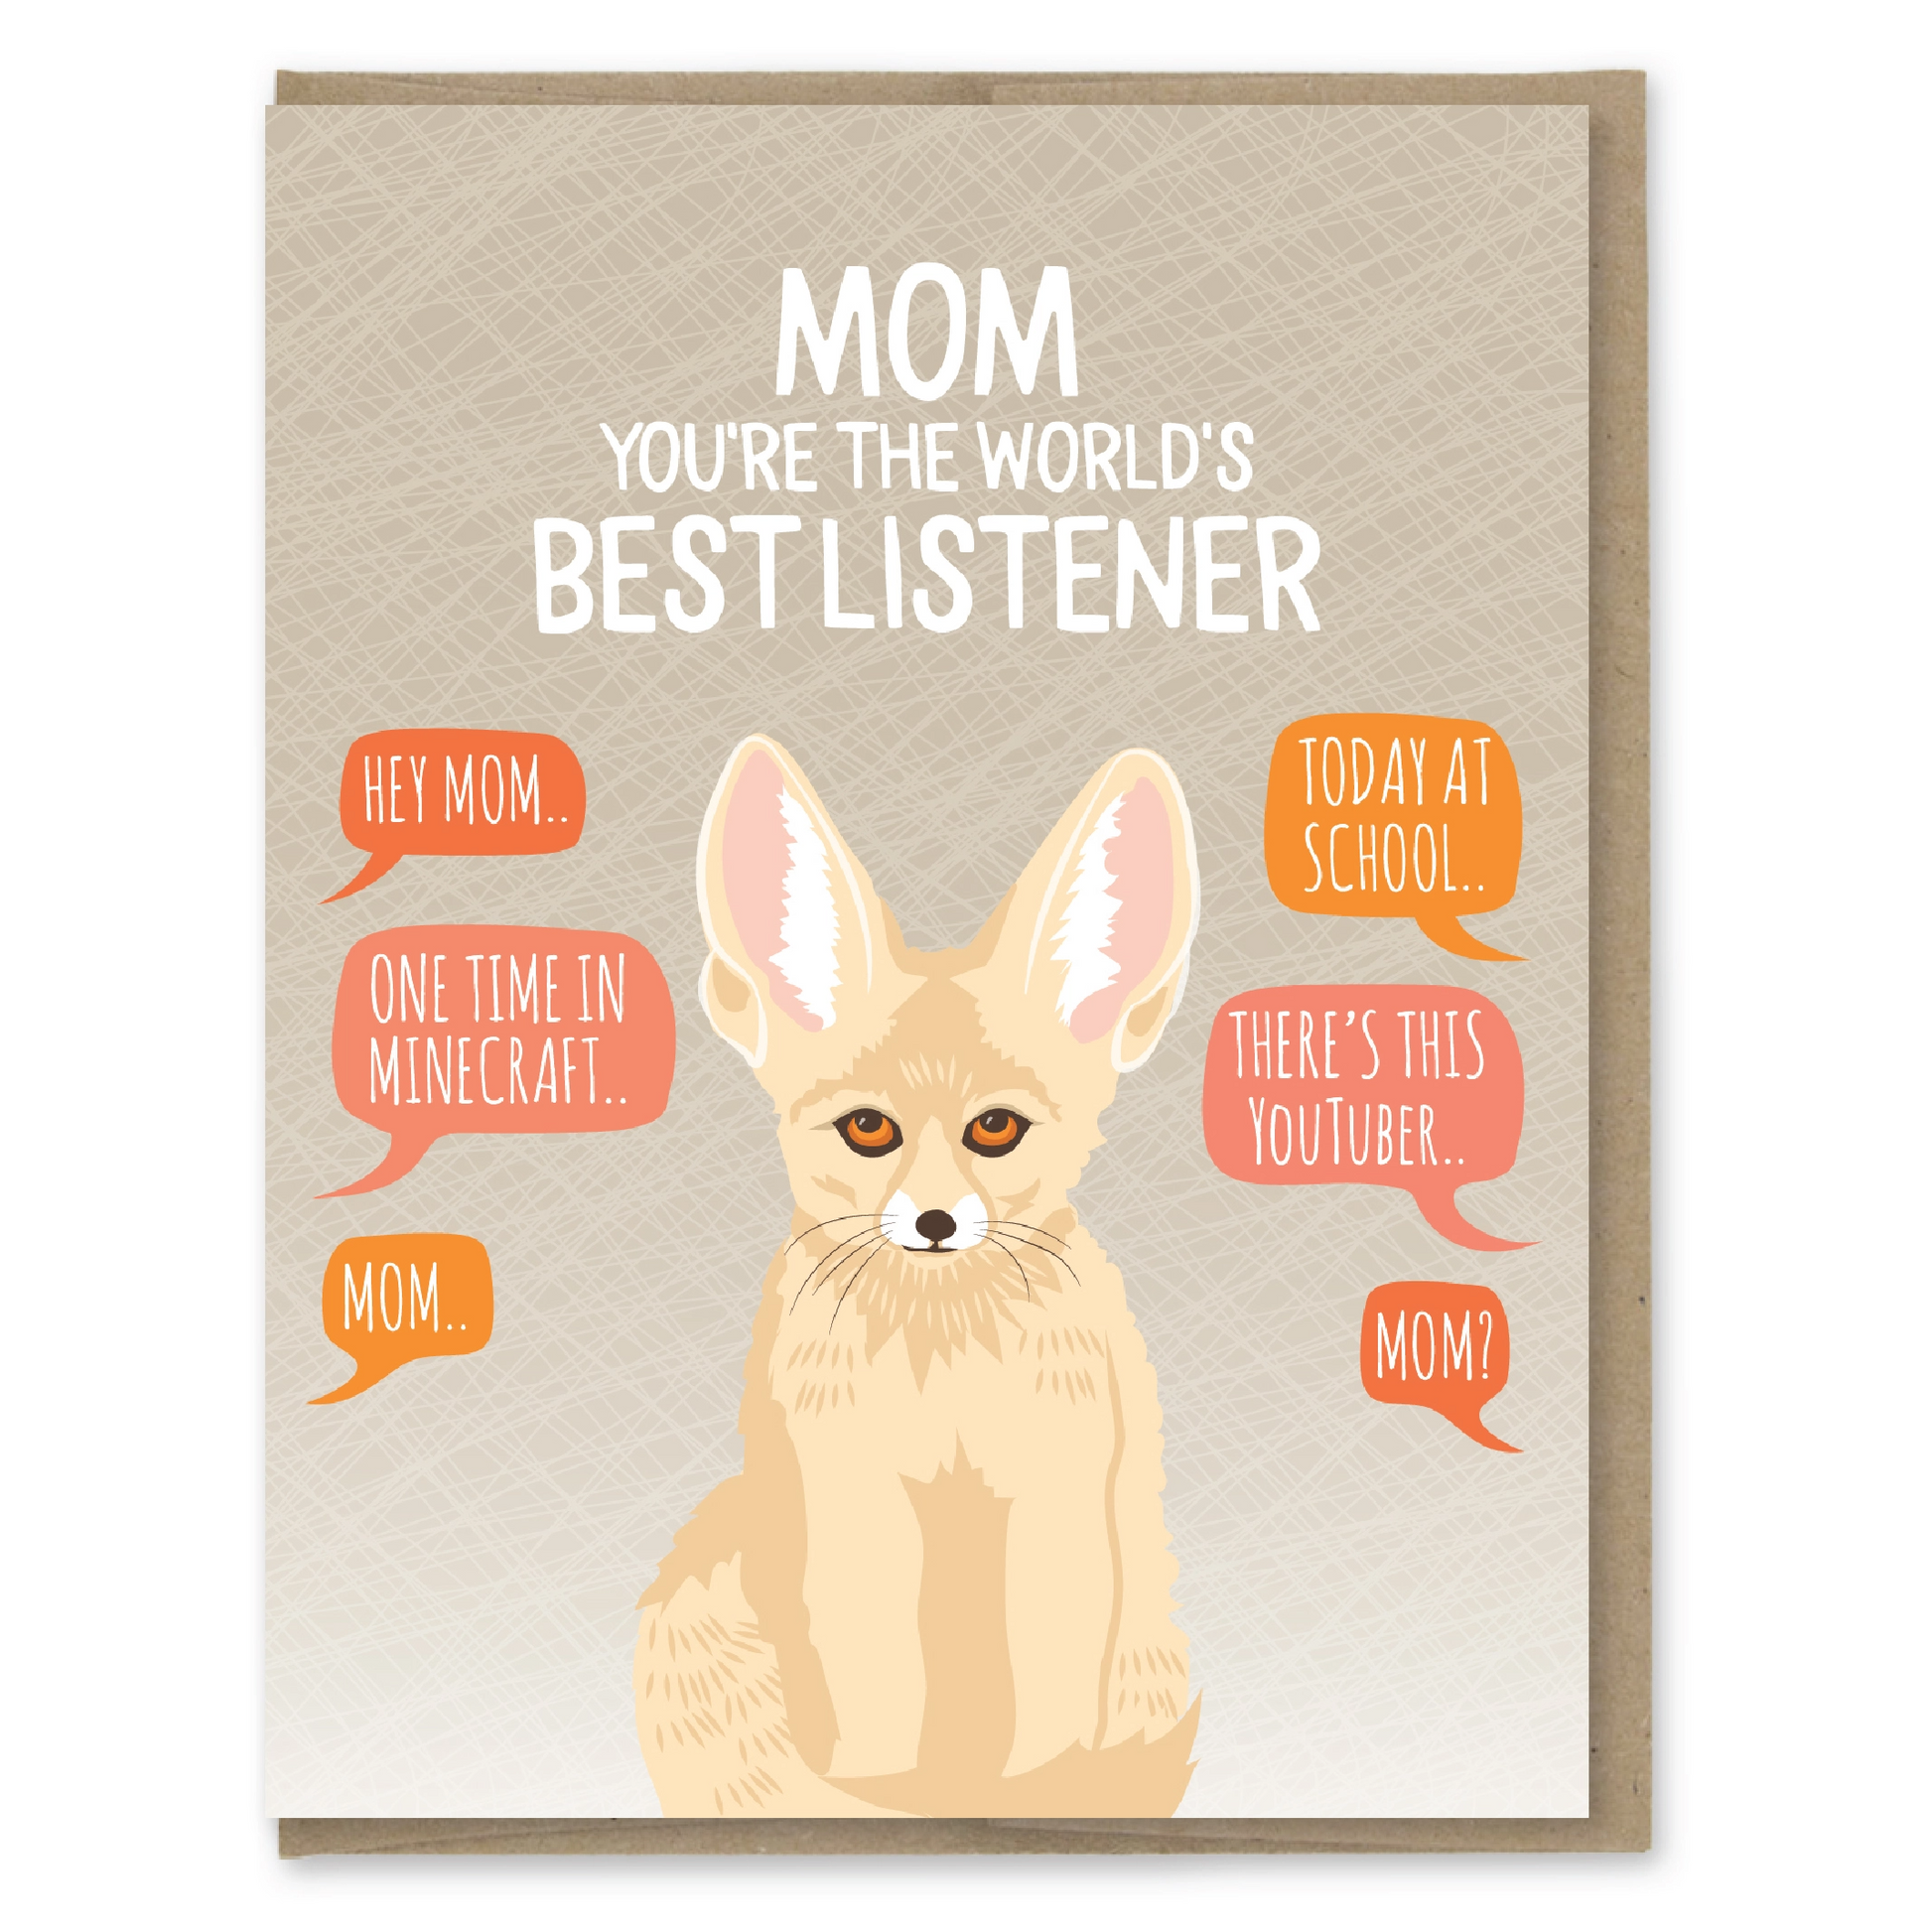 Mom You're The World's Best Listener - Mother's Day Greeting Card - Mellow Monkey